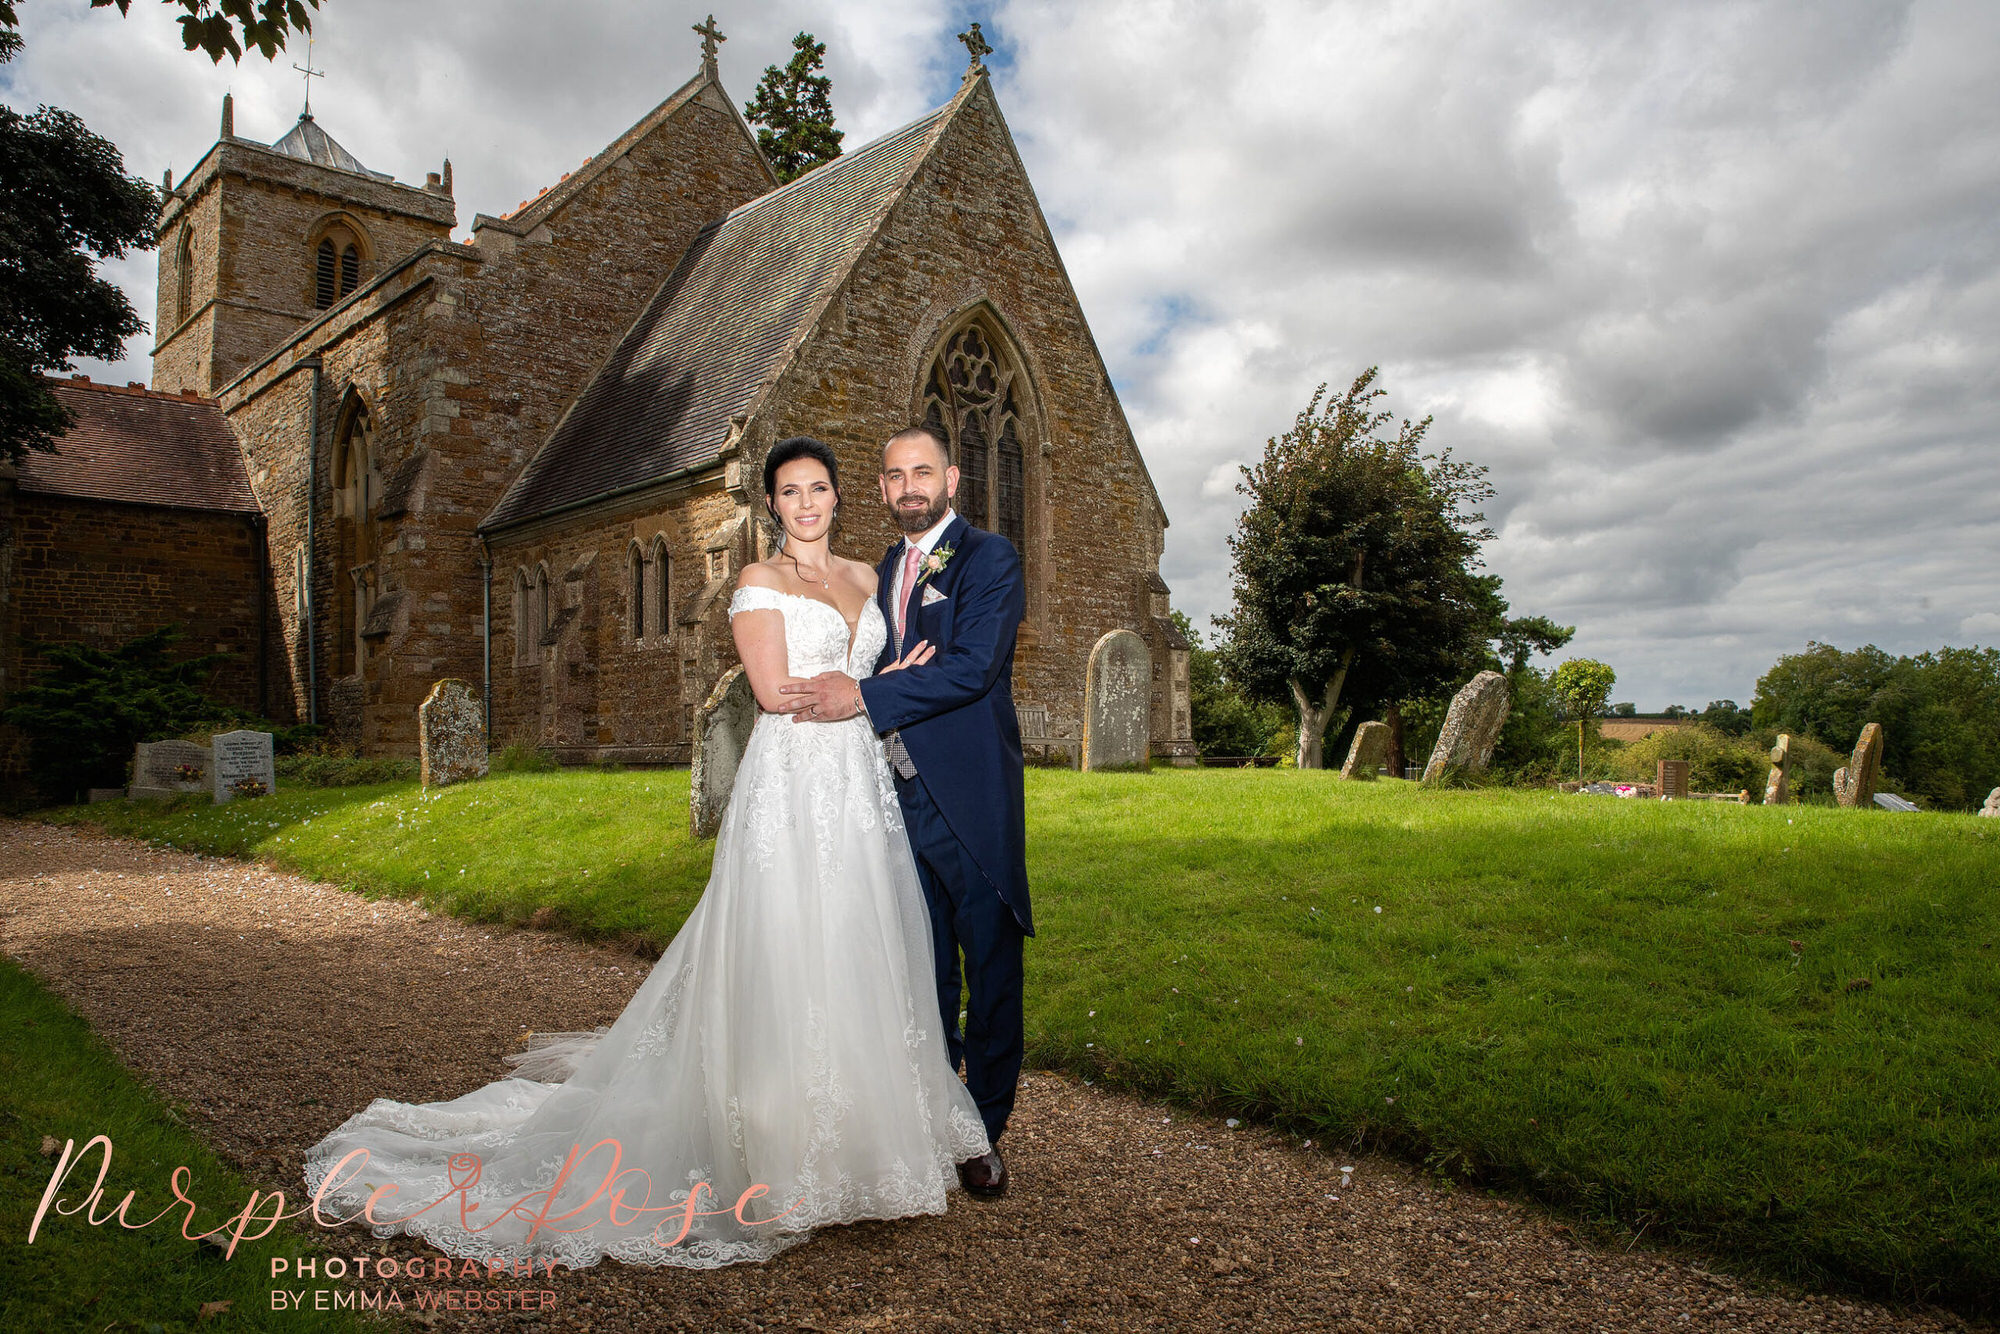 Bride and groom stood outside their church after their wedding